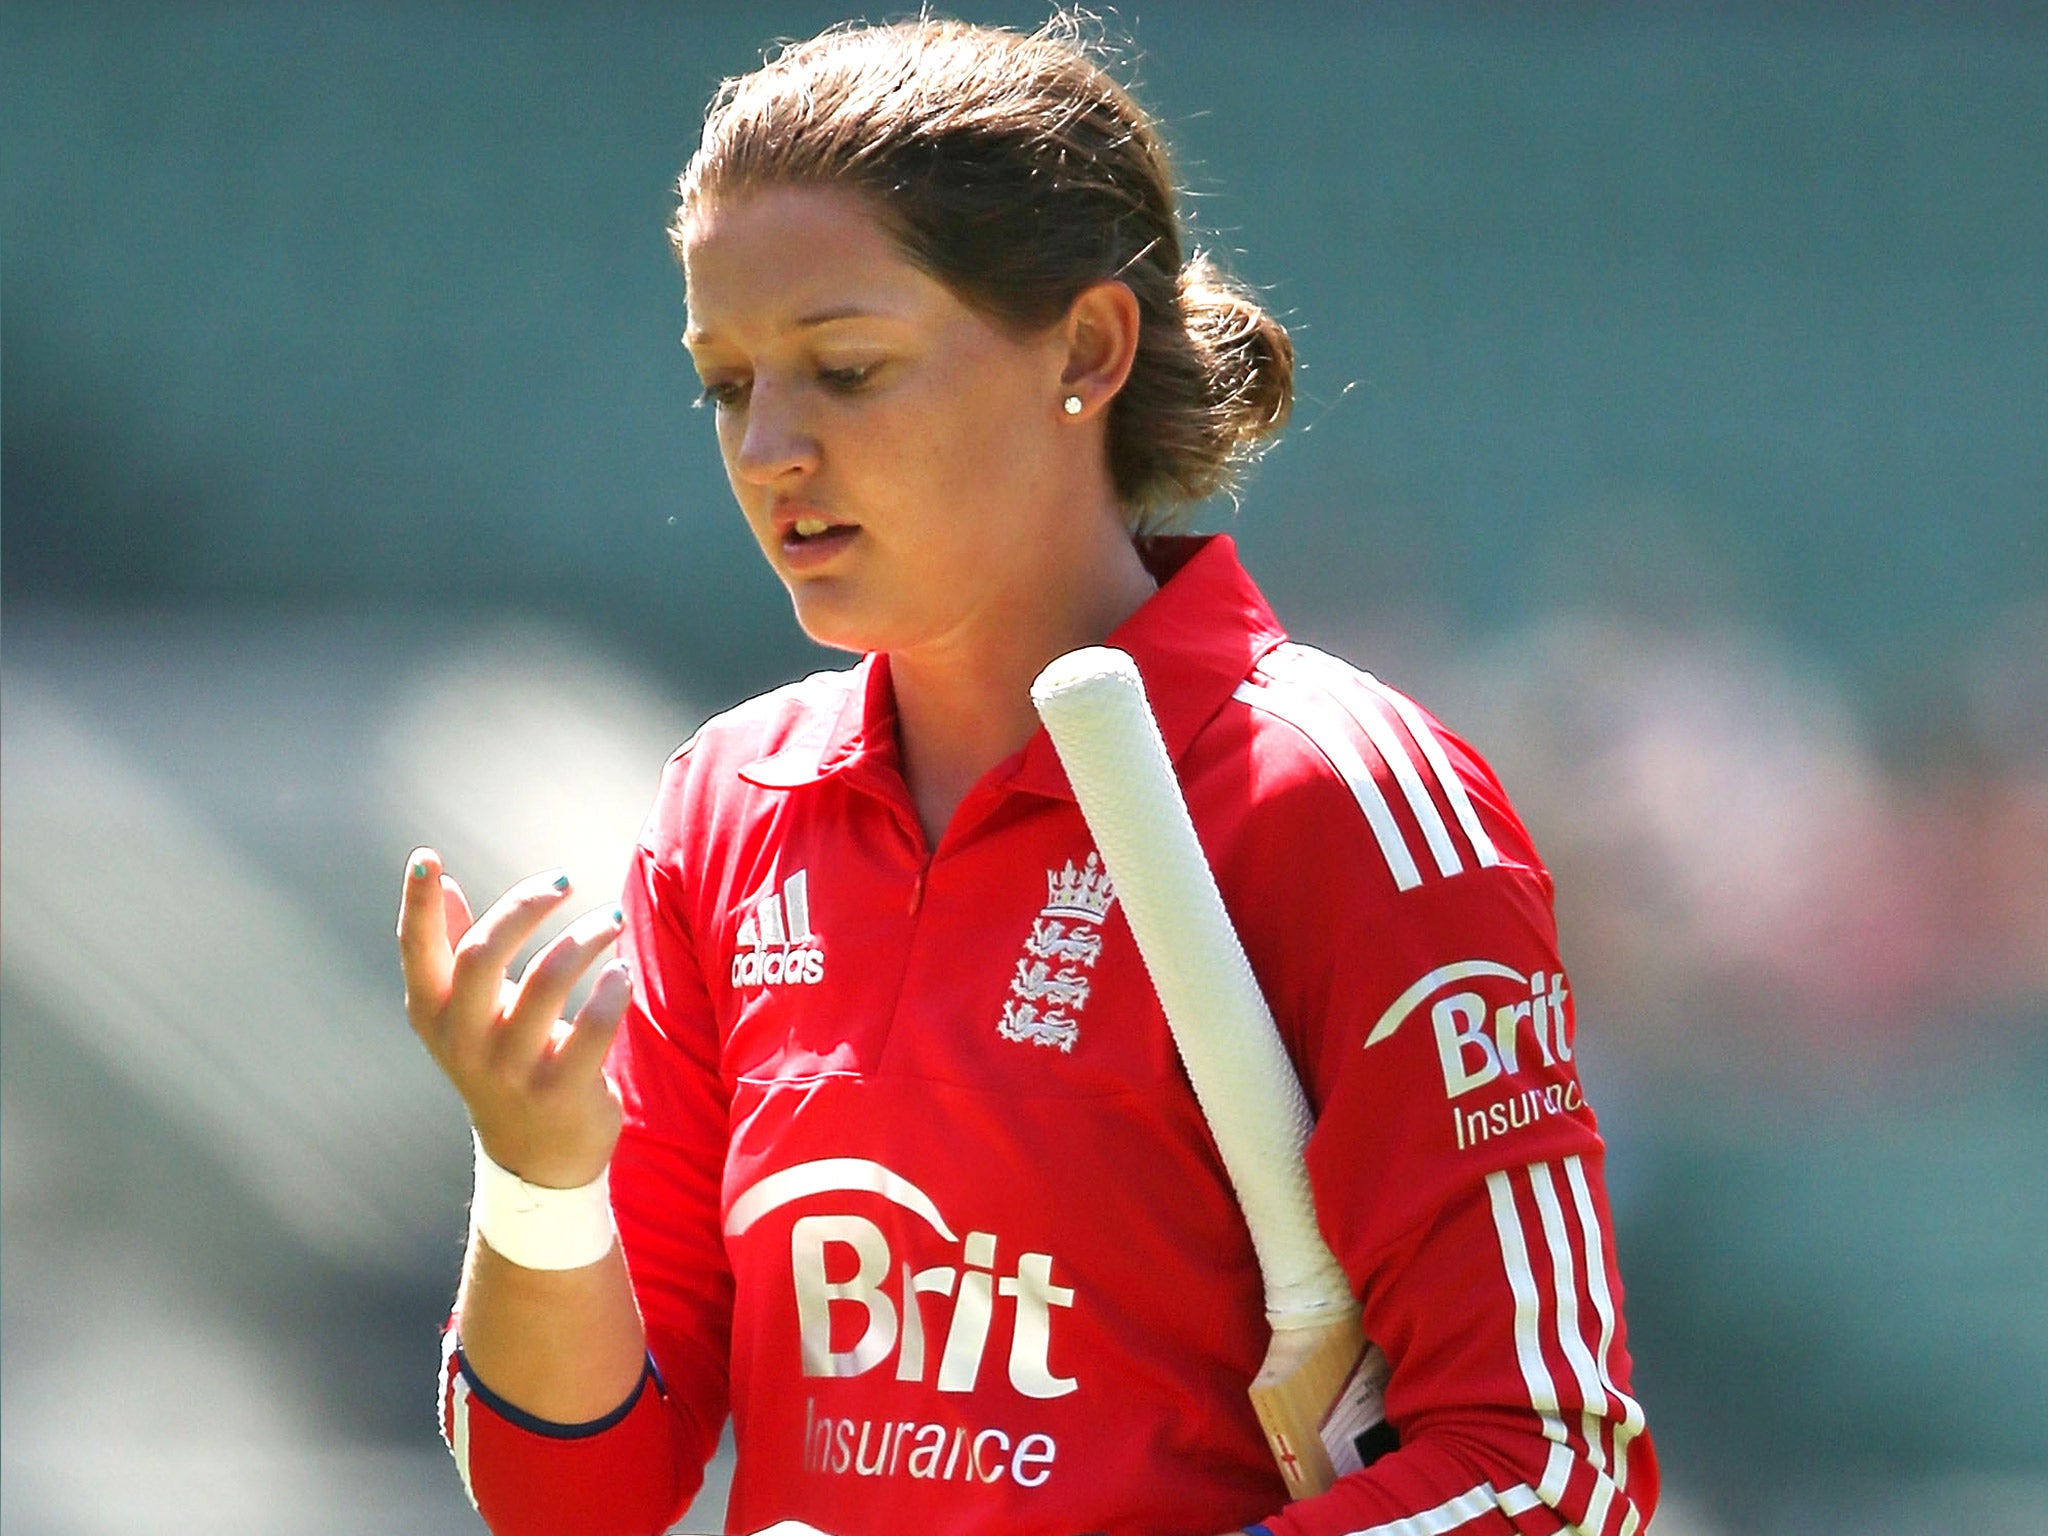 If Sarah Taylor had not been run out by West Indies, England might have won